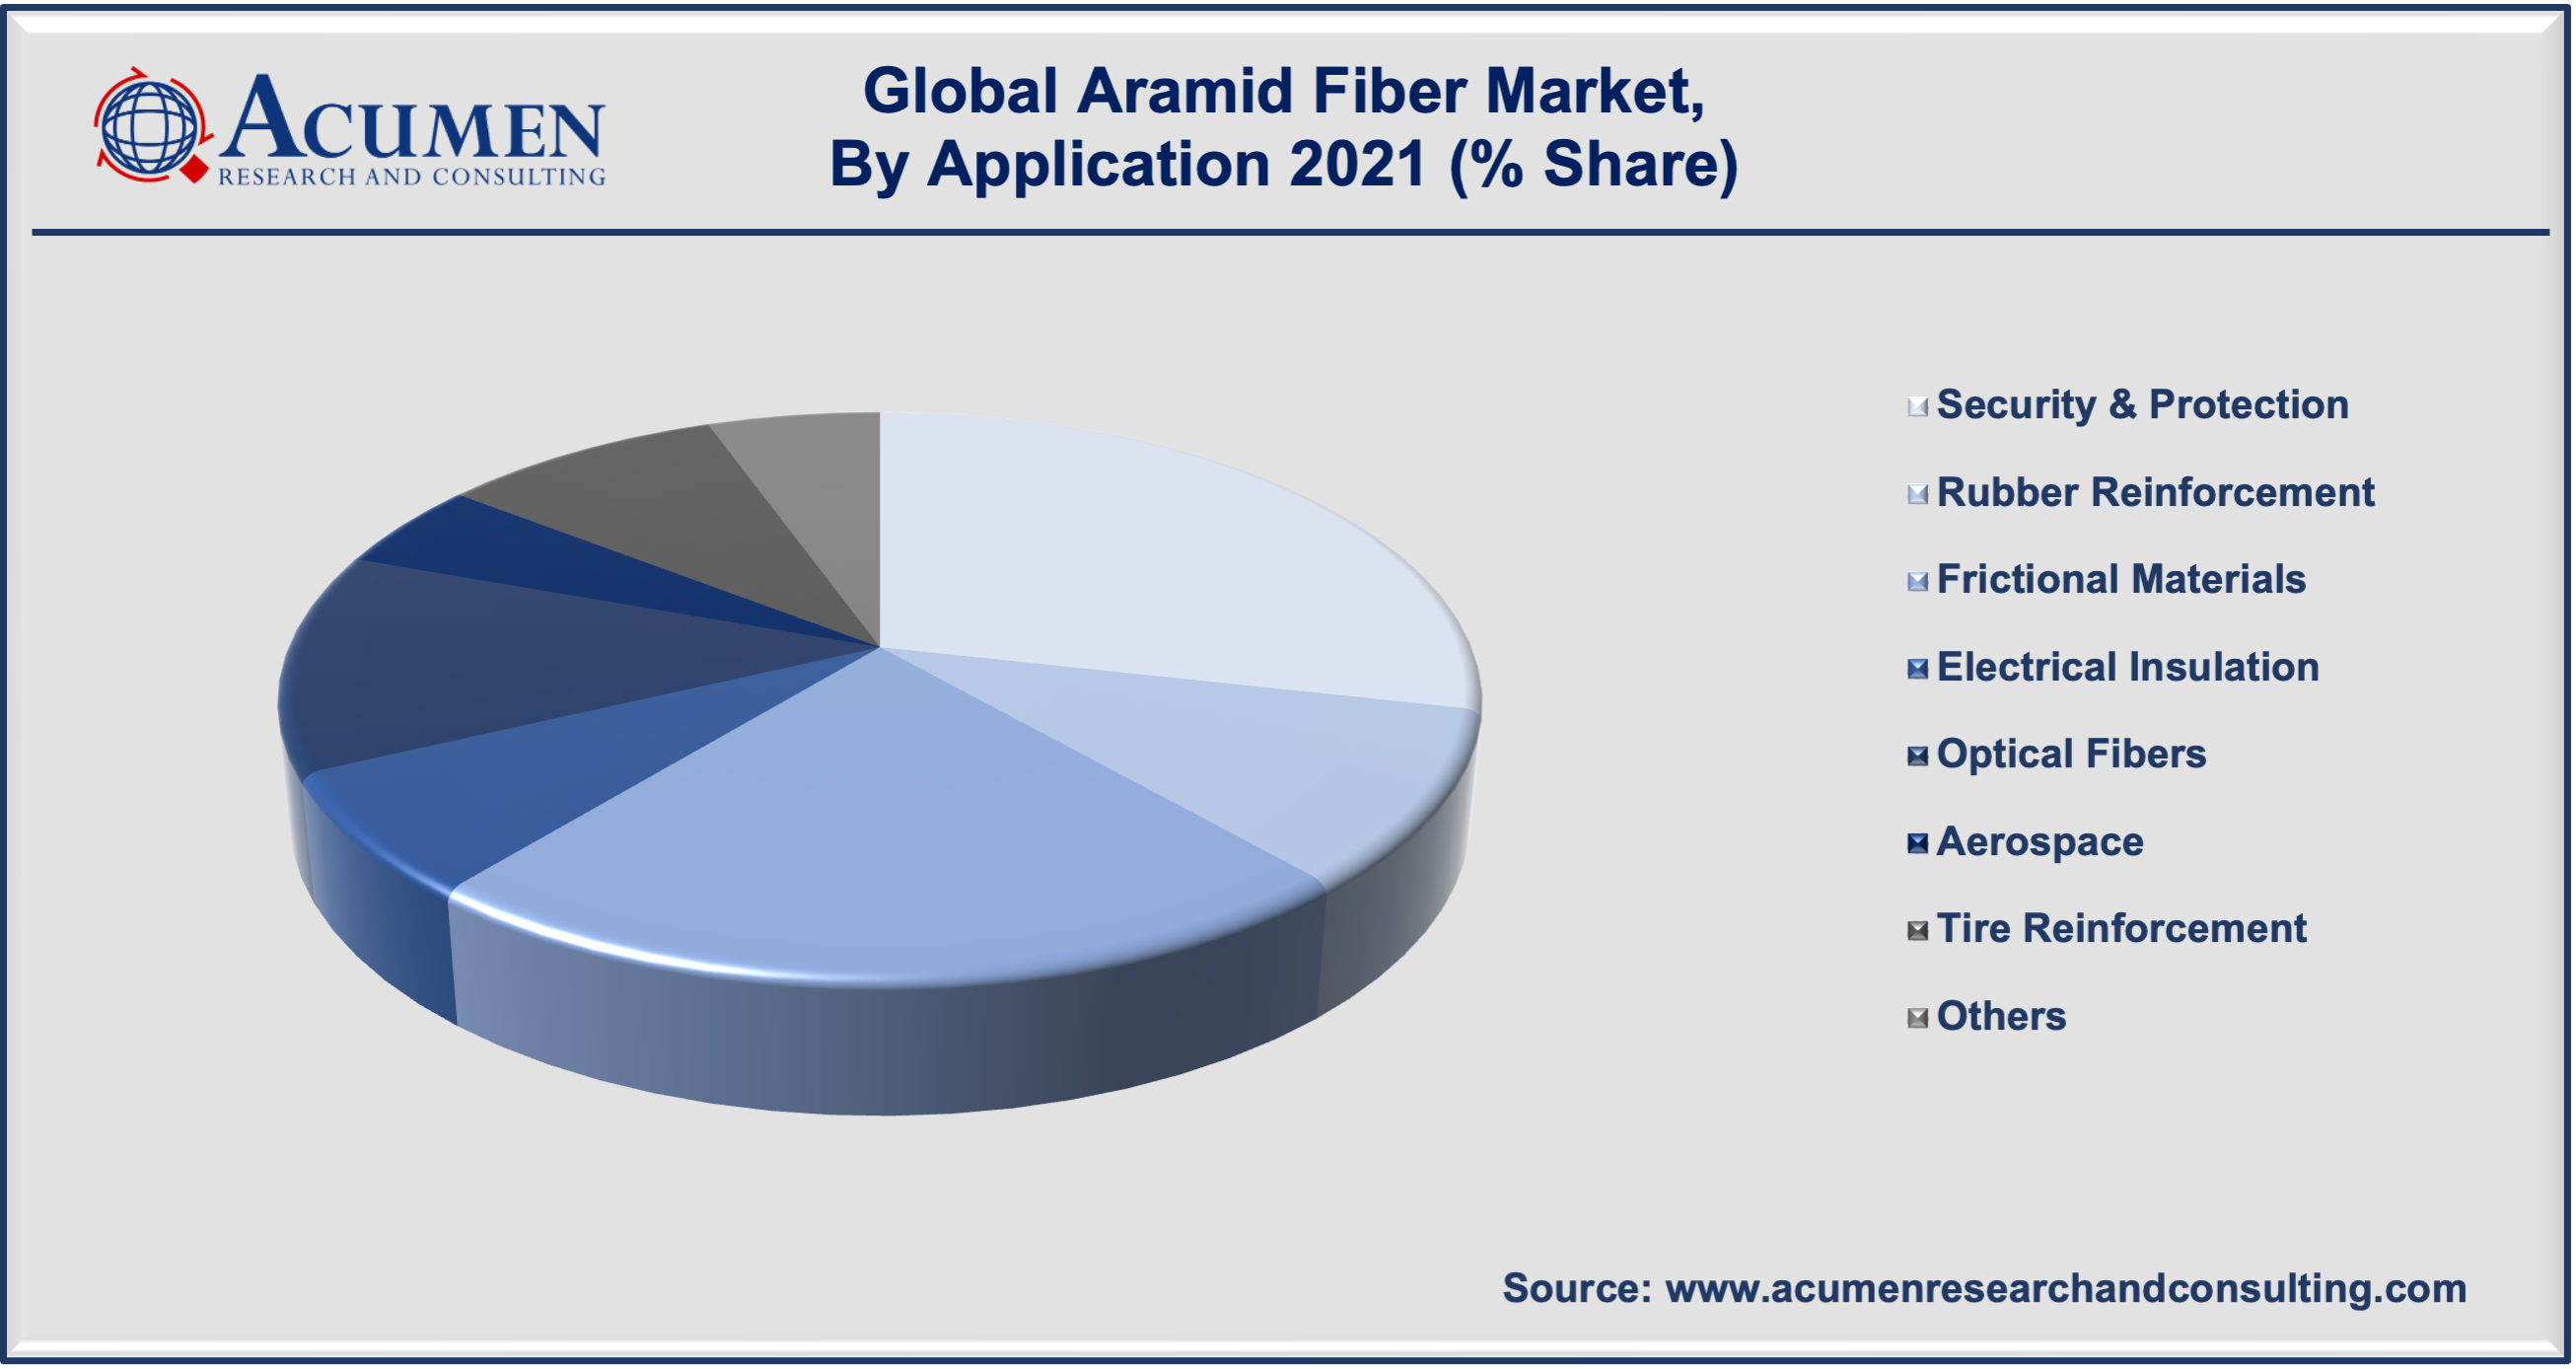 Aramid Fiber Market Share accounted for USD 3,748 Million in 2021 and is expected to reach USD 7,488 Million by 2030 growing at a CAGR of 8.2% during the forecast period from 2022 to 2030.